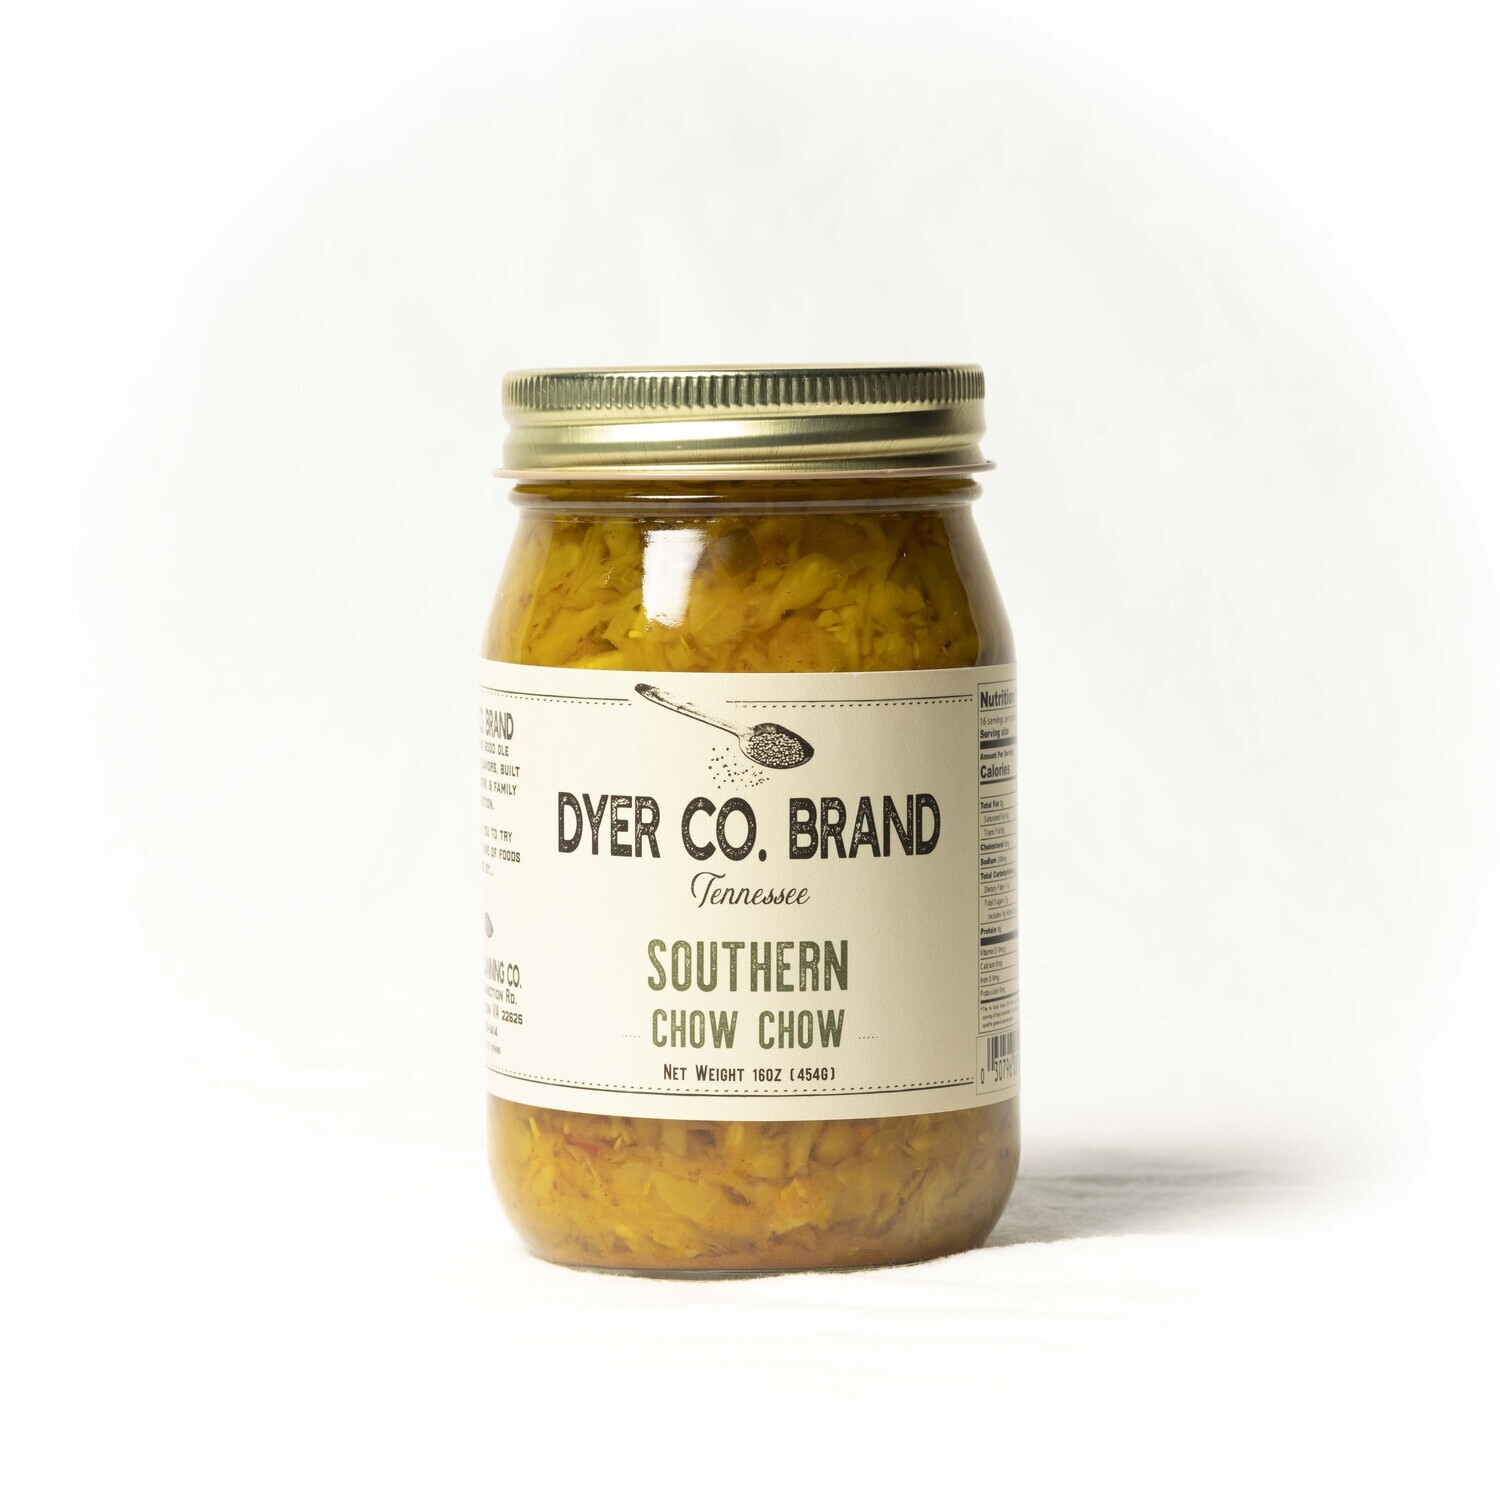 Dyer Co Brand Southern Chow Chow